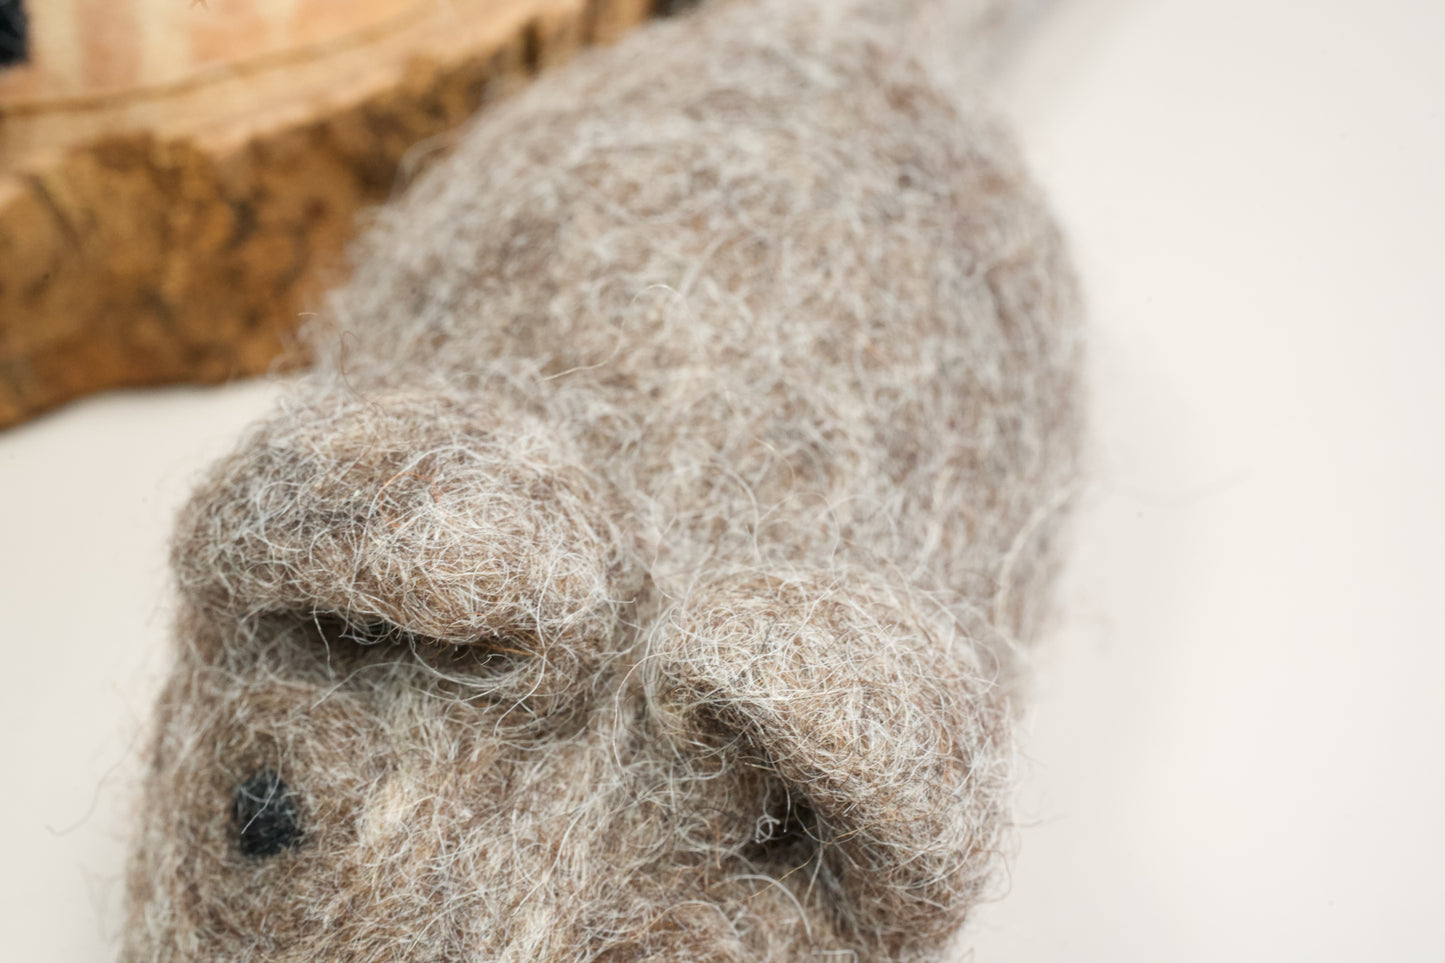 Close-up view of wool cat mouse fibers.